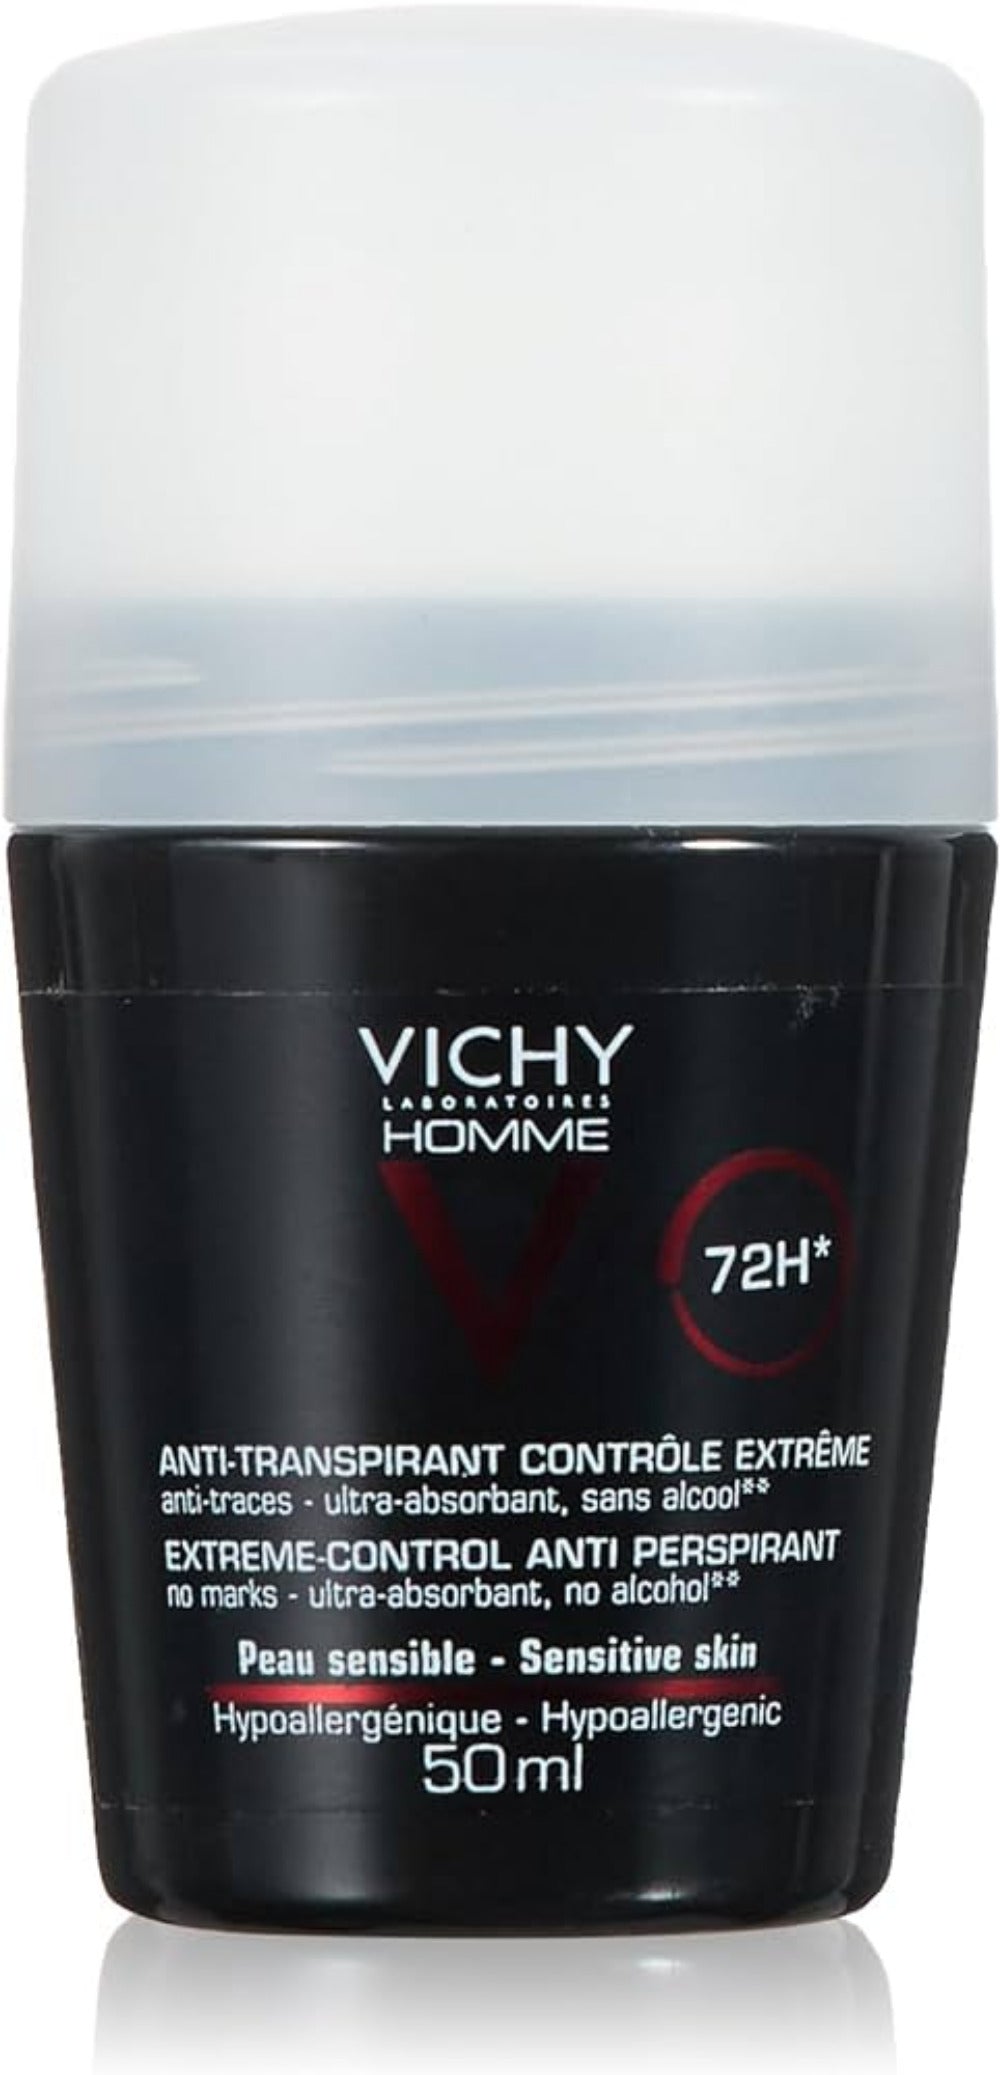 Vichy Homme Extreme Control 74hrs Anti-Perspirant Roll-On Deodorant - 50 ml